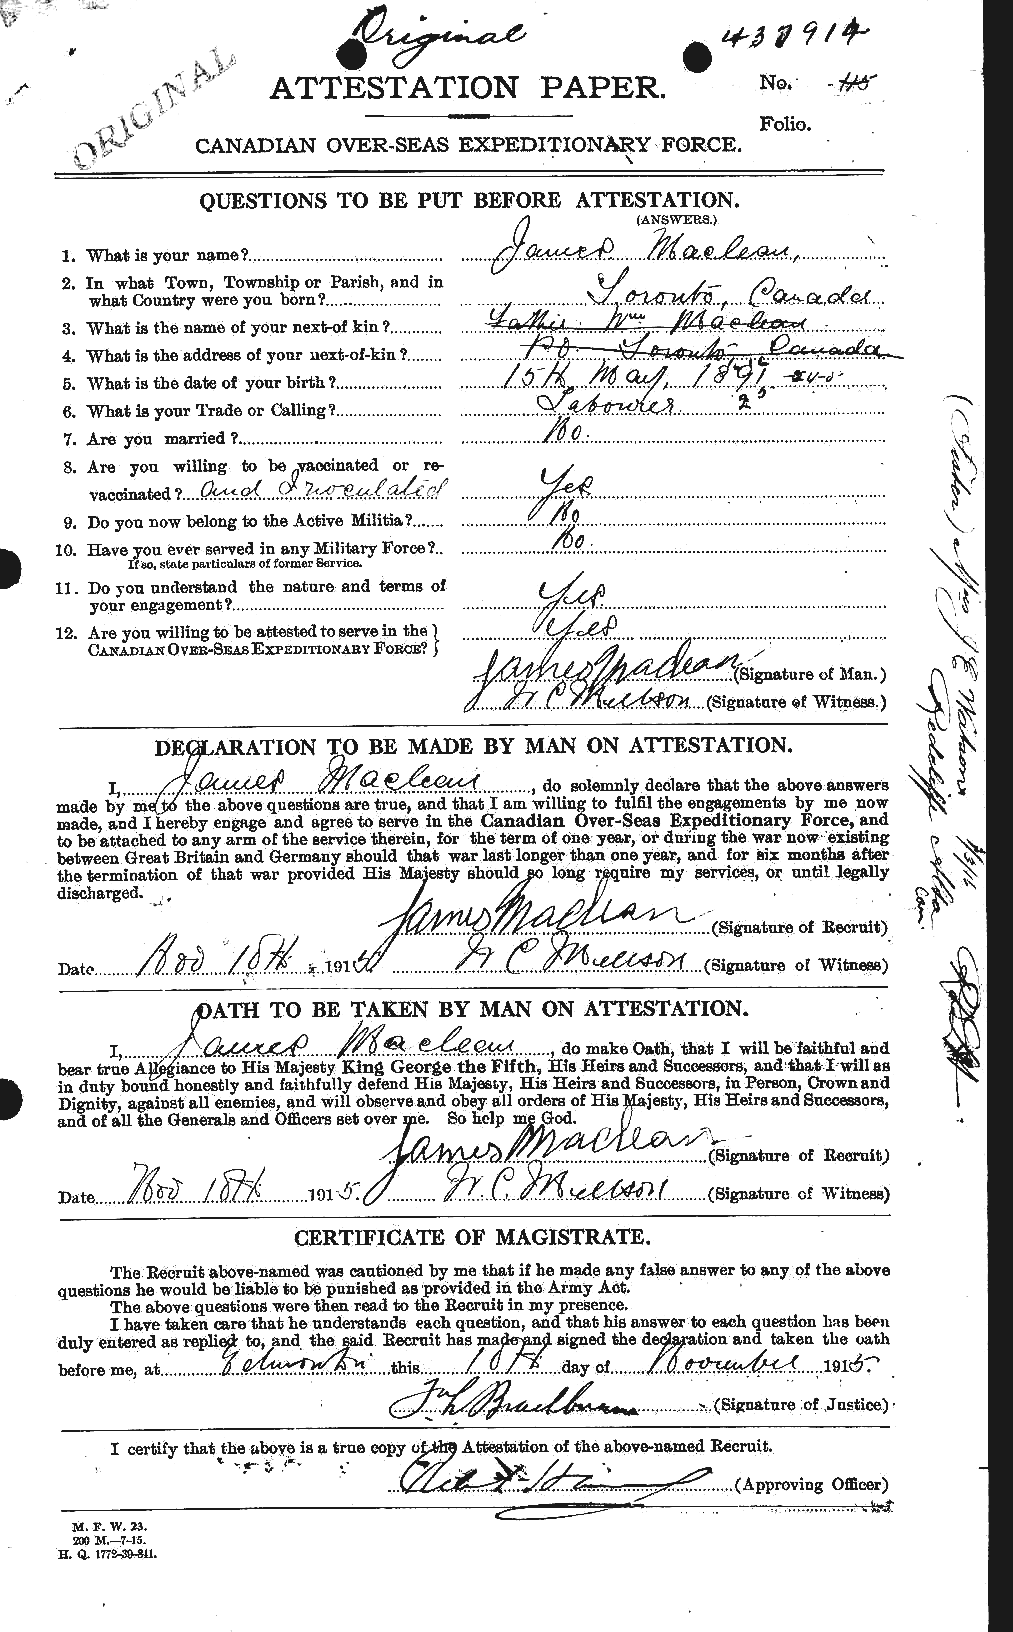 Personnel Records of the First World War - CEF 546177a